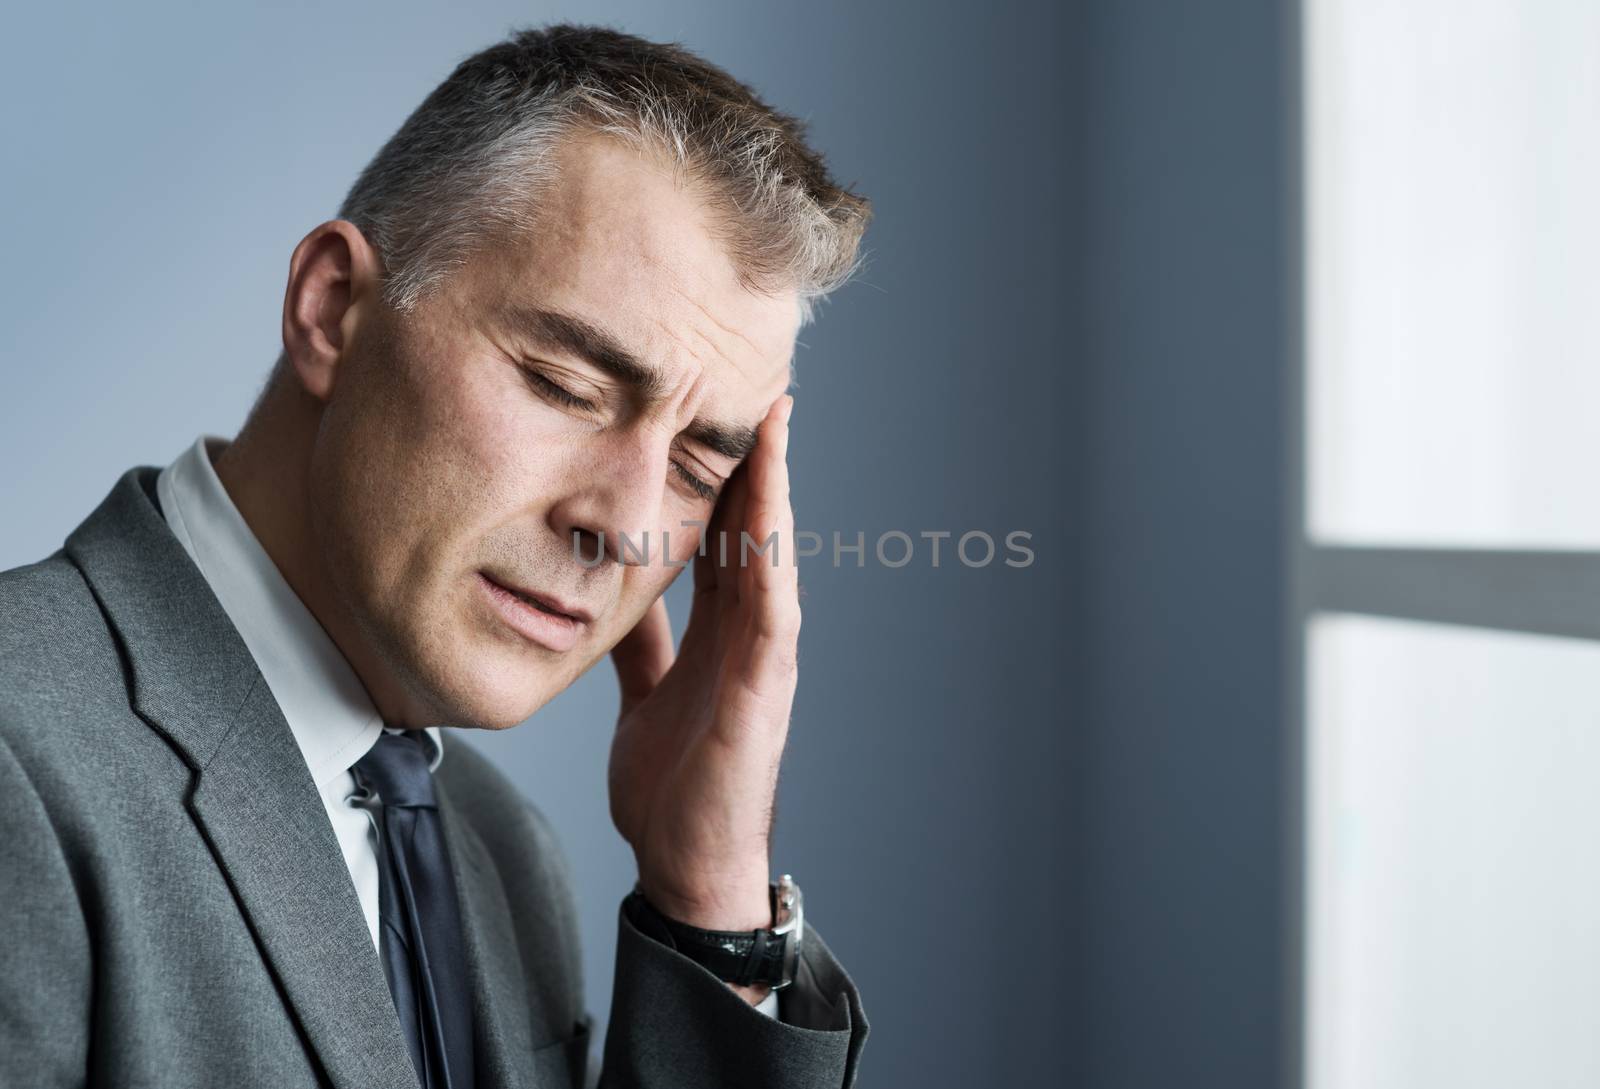 Stressed businessman with headache by stokkete